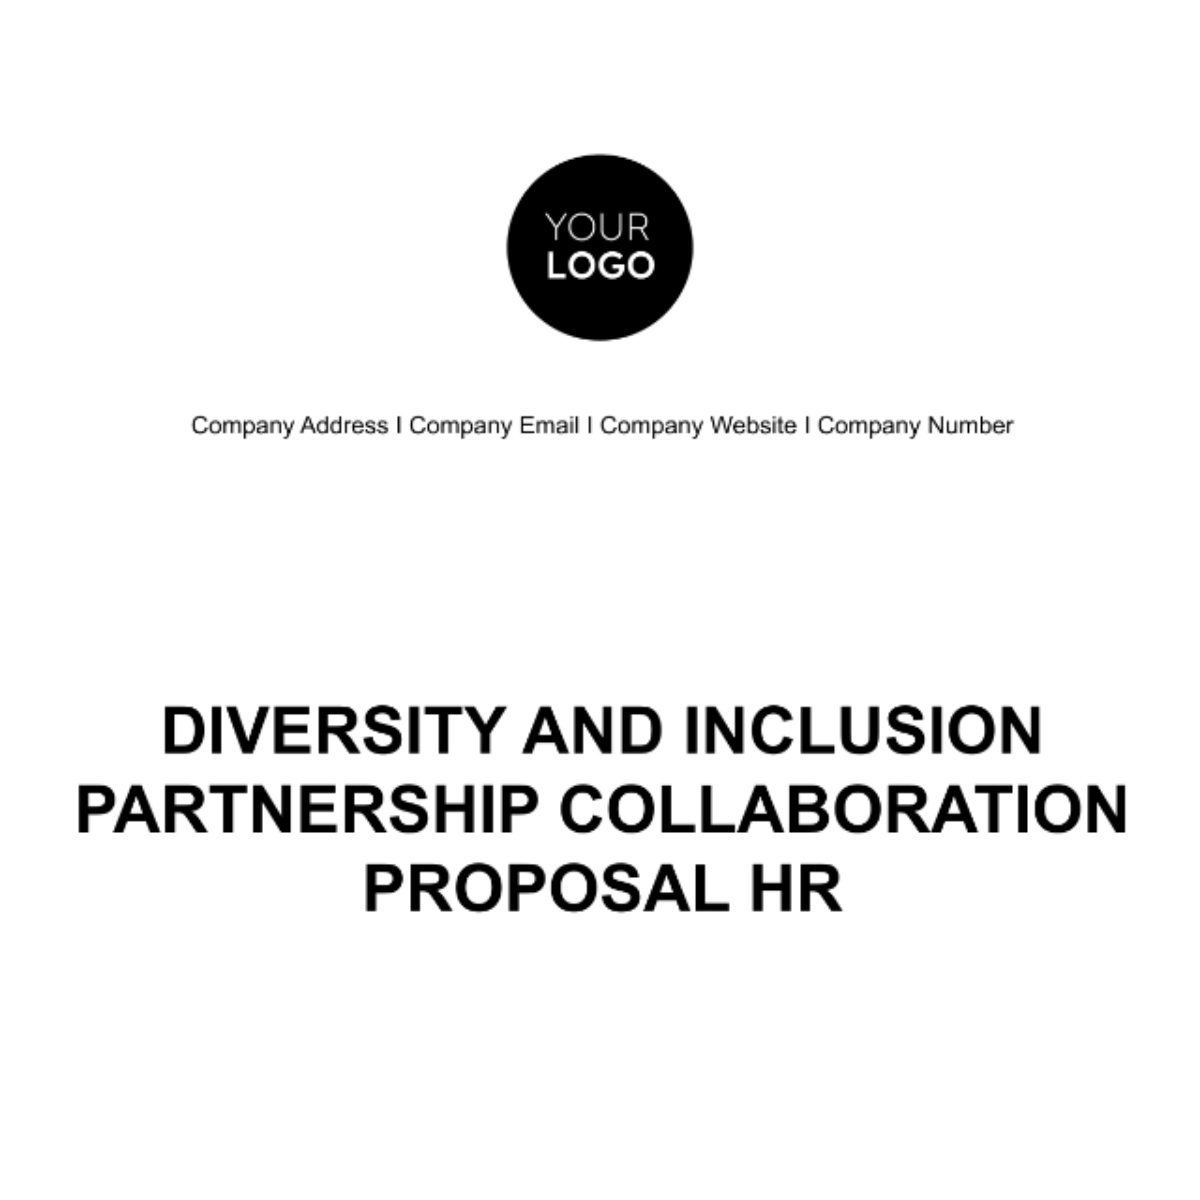 Free Diversity and Inclusion Partnership Collaboration Proposal HR Template